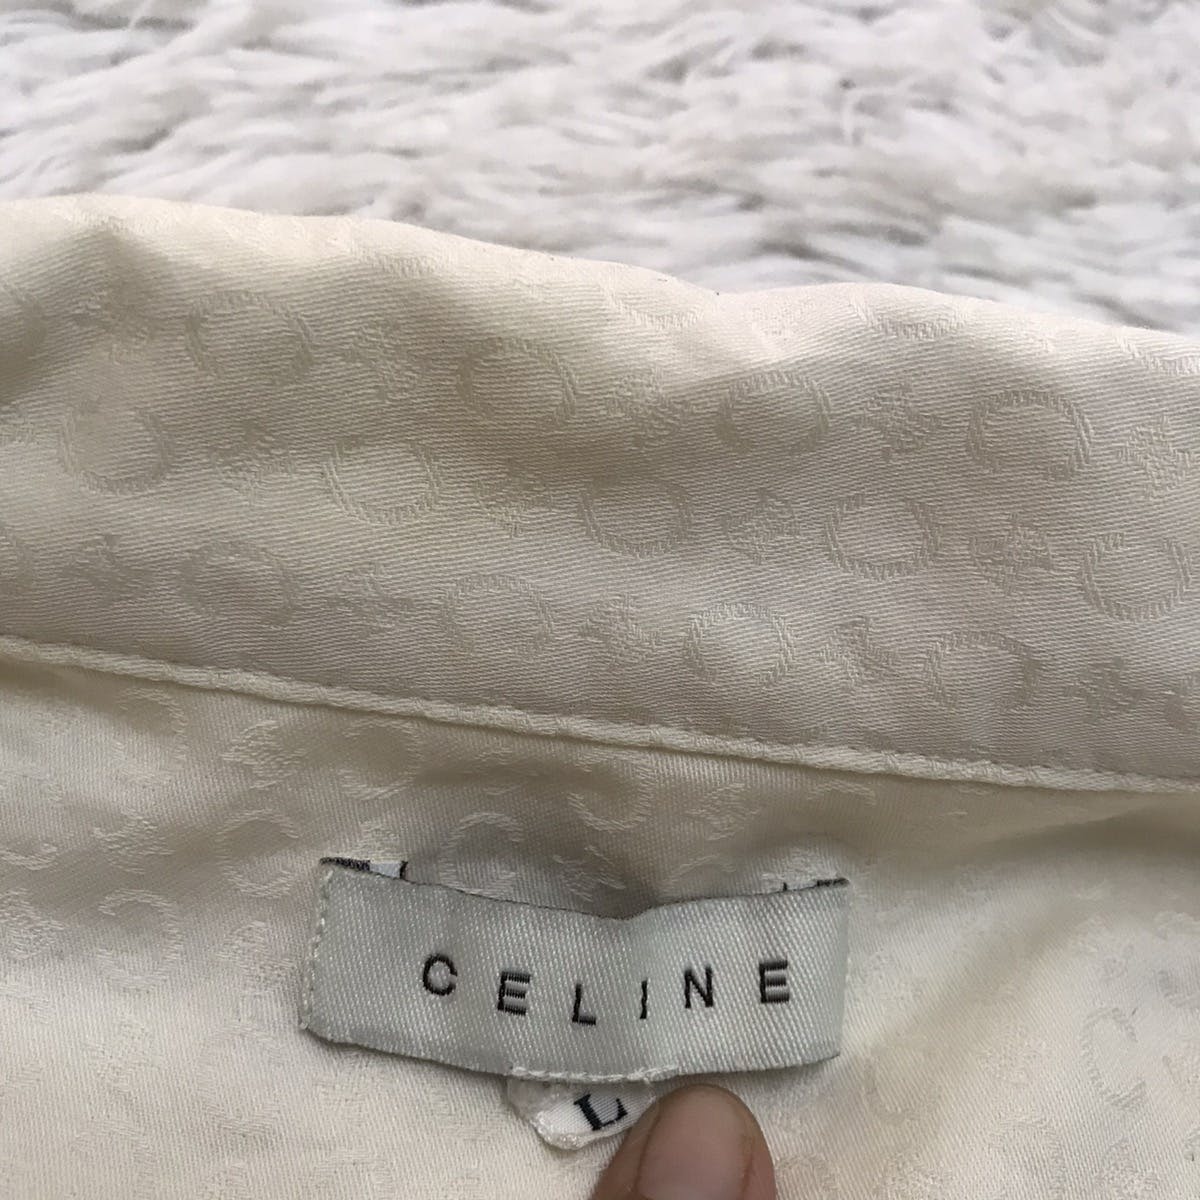 Celine button up shirt made in Japan - 8